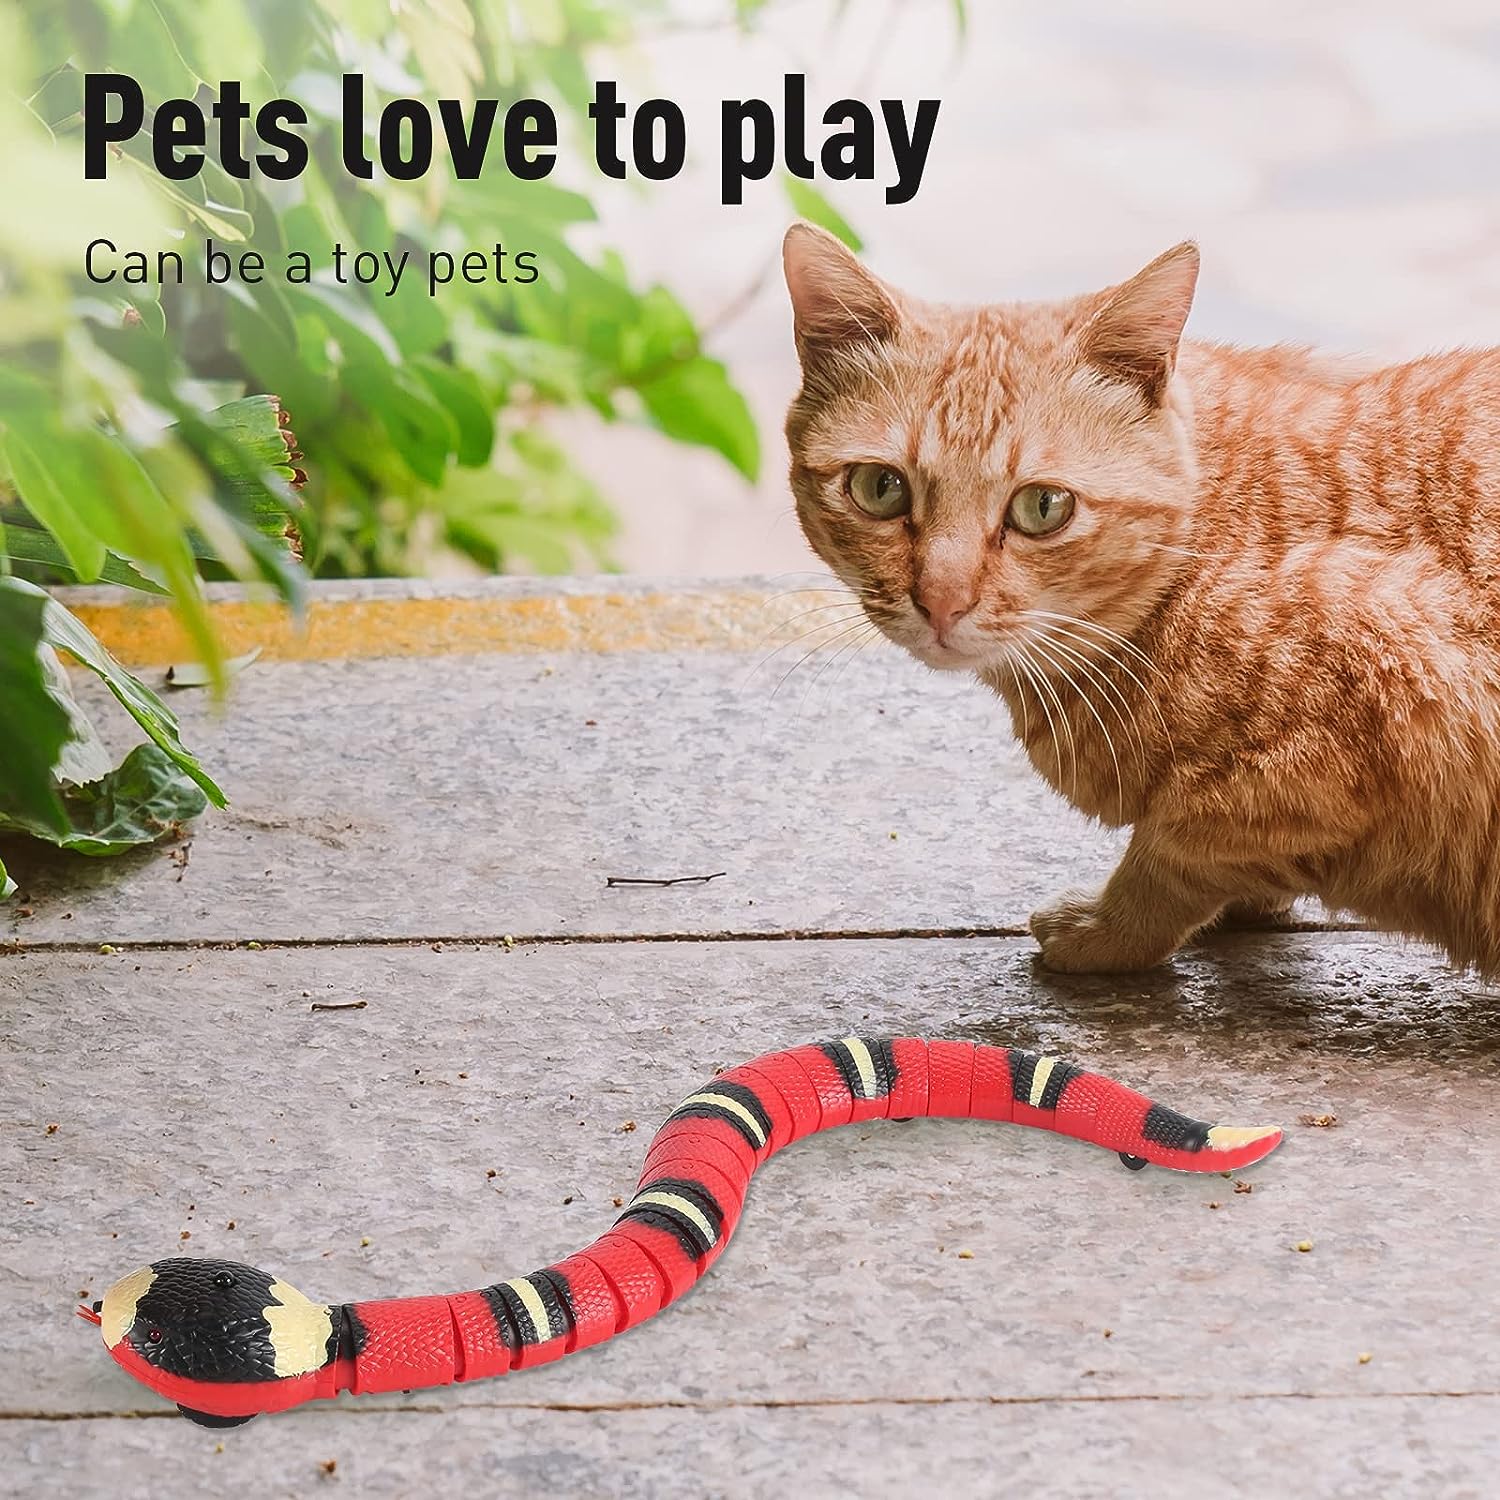 Cat Toys Snake Interactive,Realistic Simulation Smart Sensing Snake Toy,USB Rechargeable,Automatically Sense Obstacles and Escape,Moving Electric Tricky Snake Cat Toys for Indoor Cats Dogs(Pink snake)